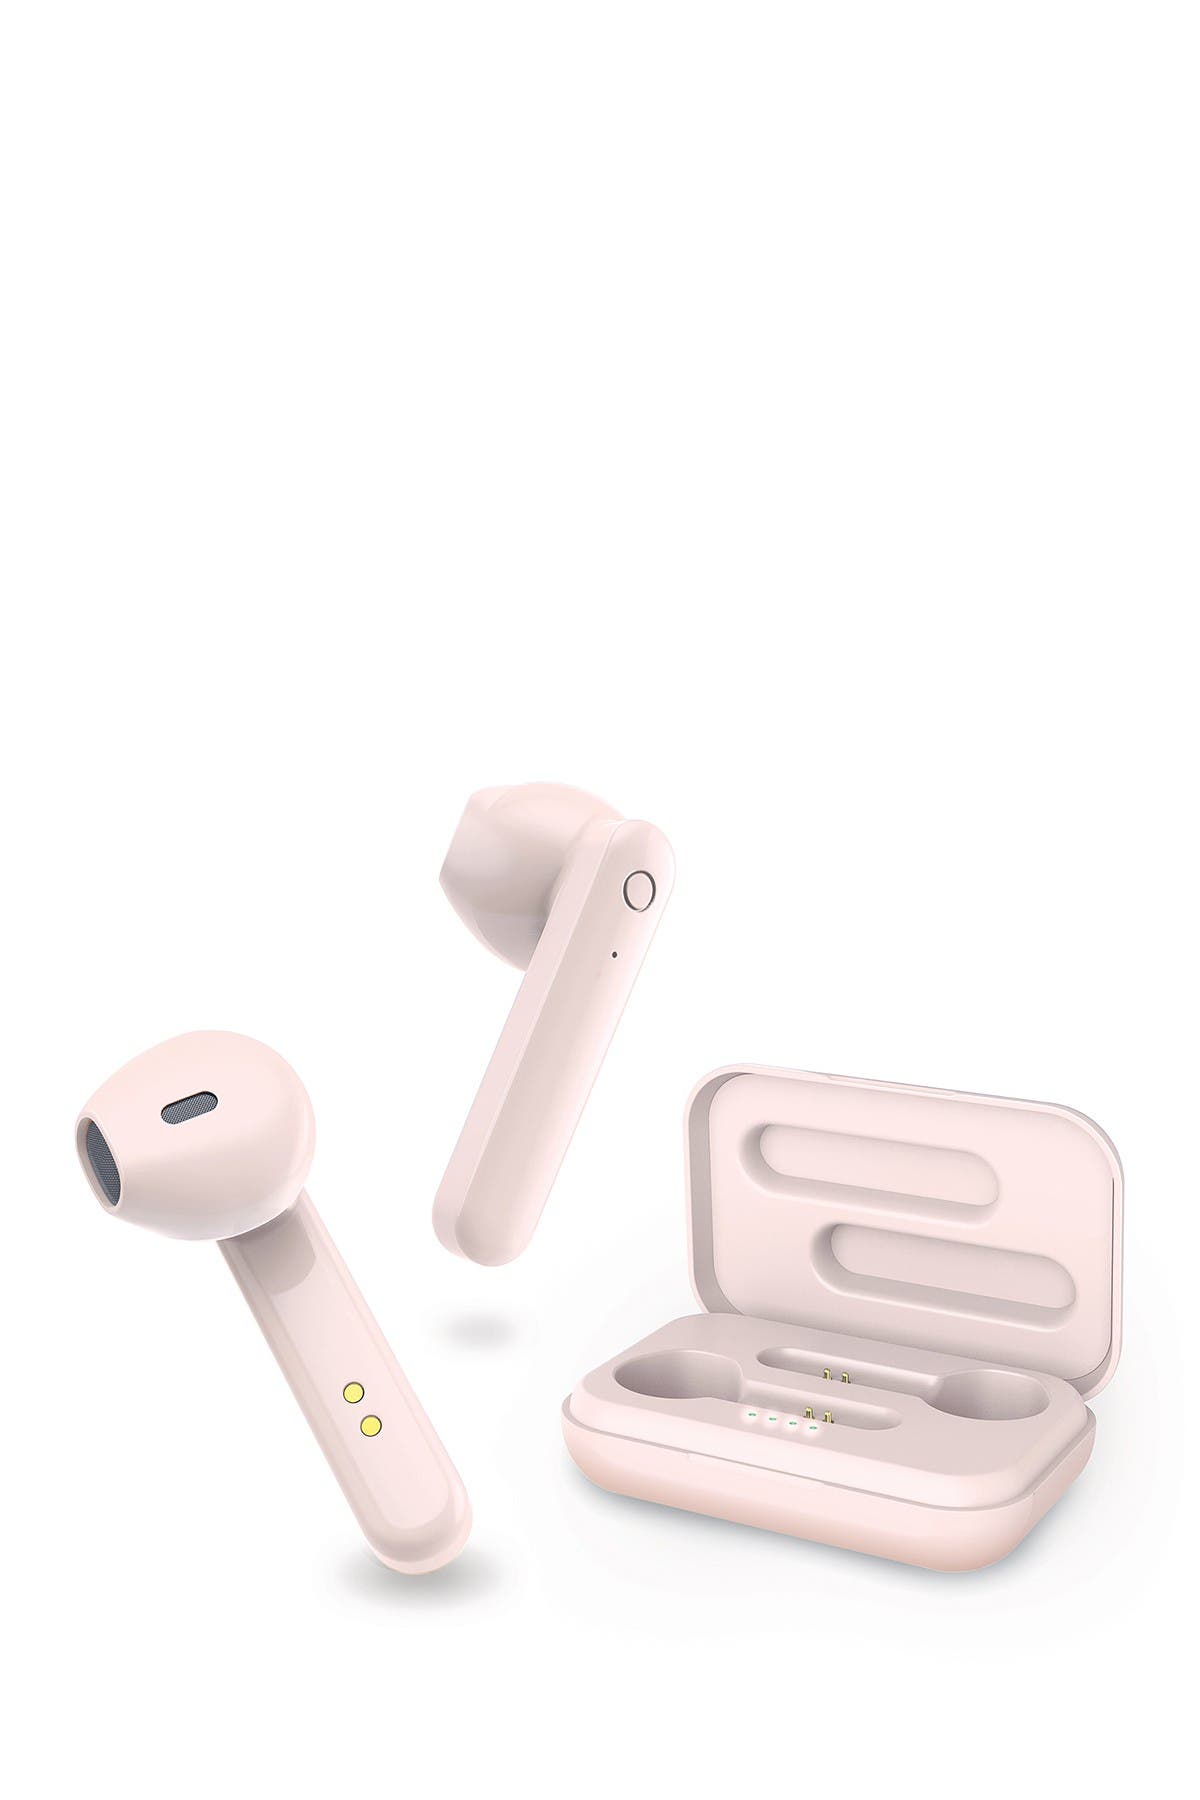 Merkury Innovations Airflair Wirefree Earbuds + Charging Case In Blush